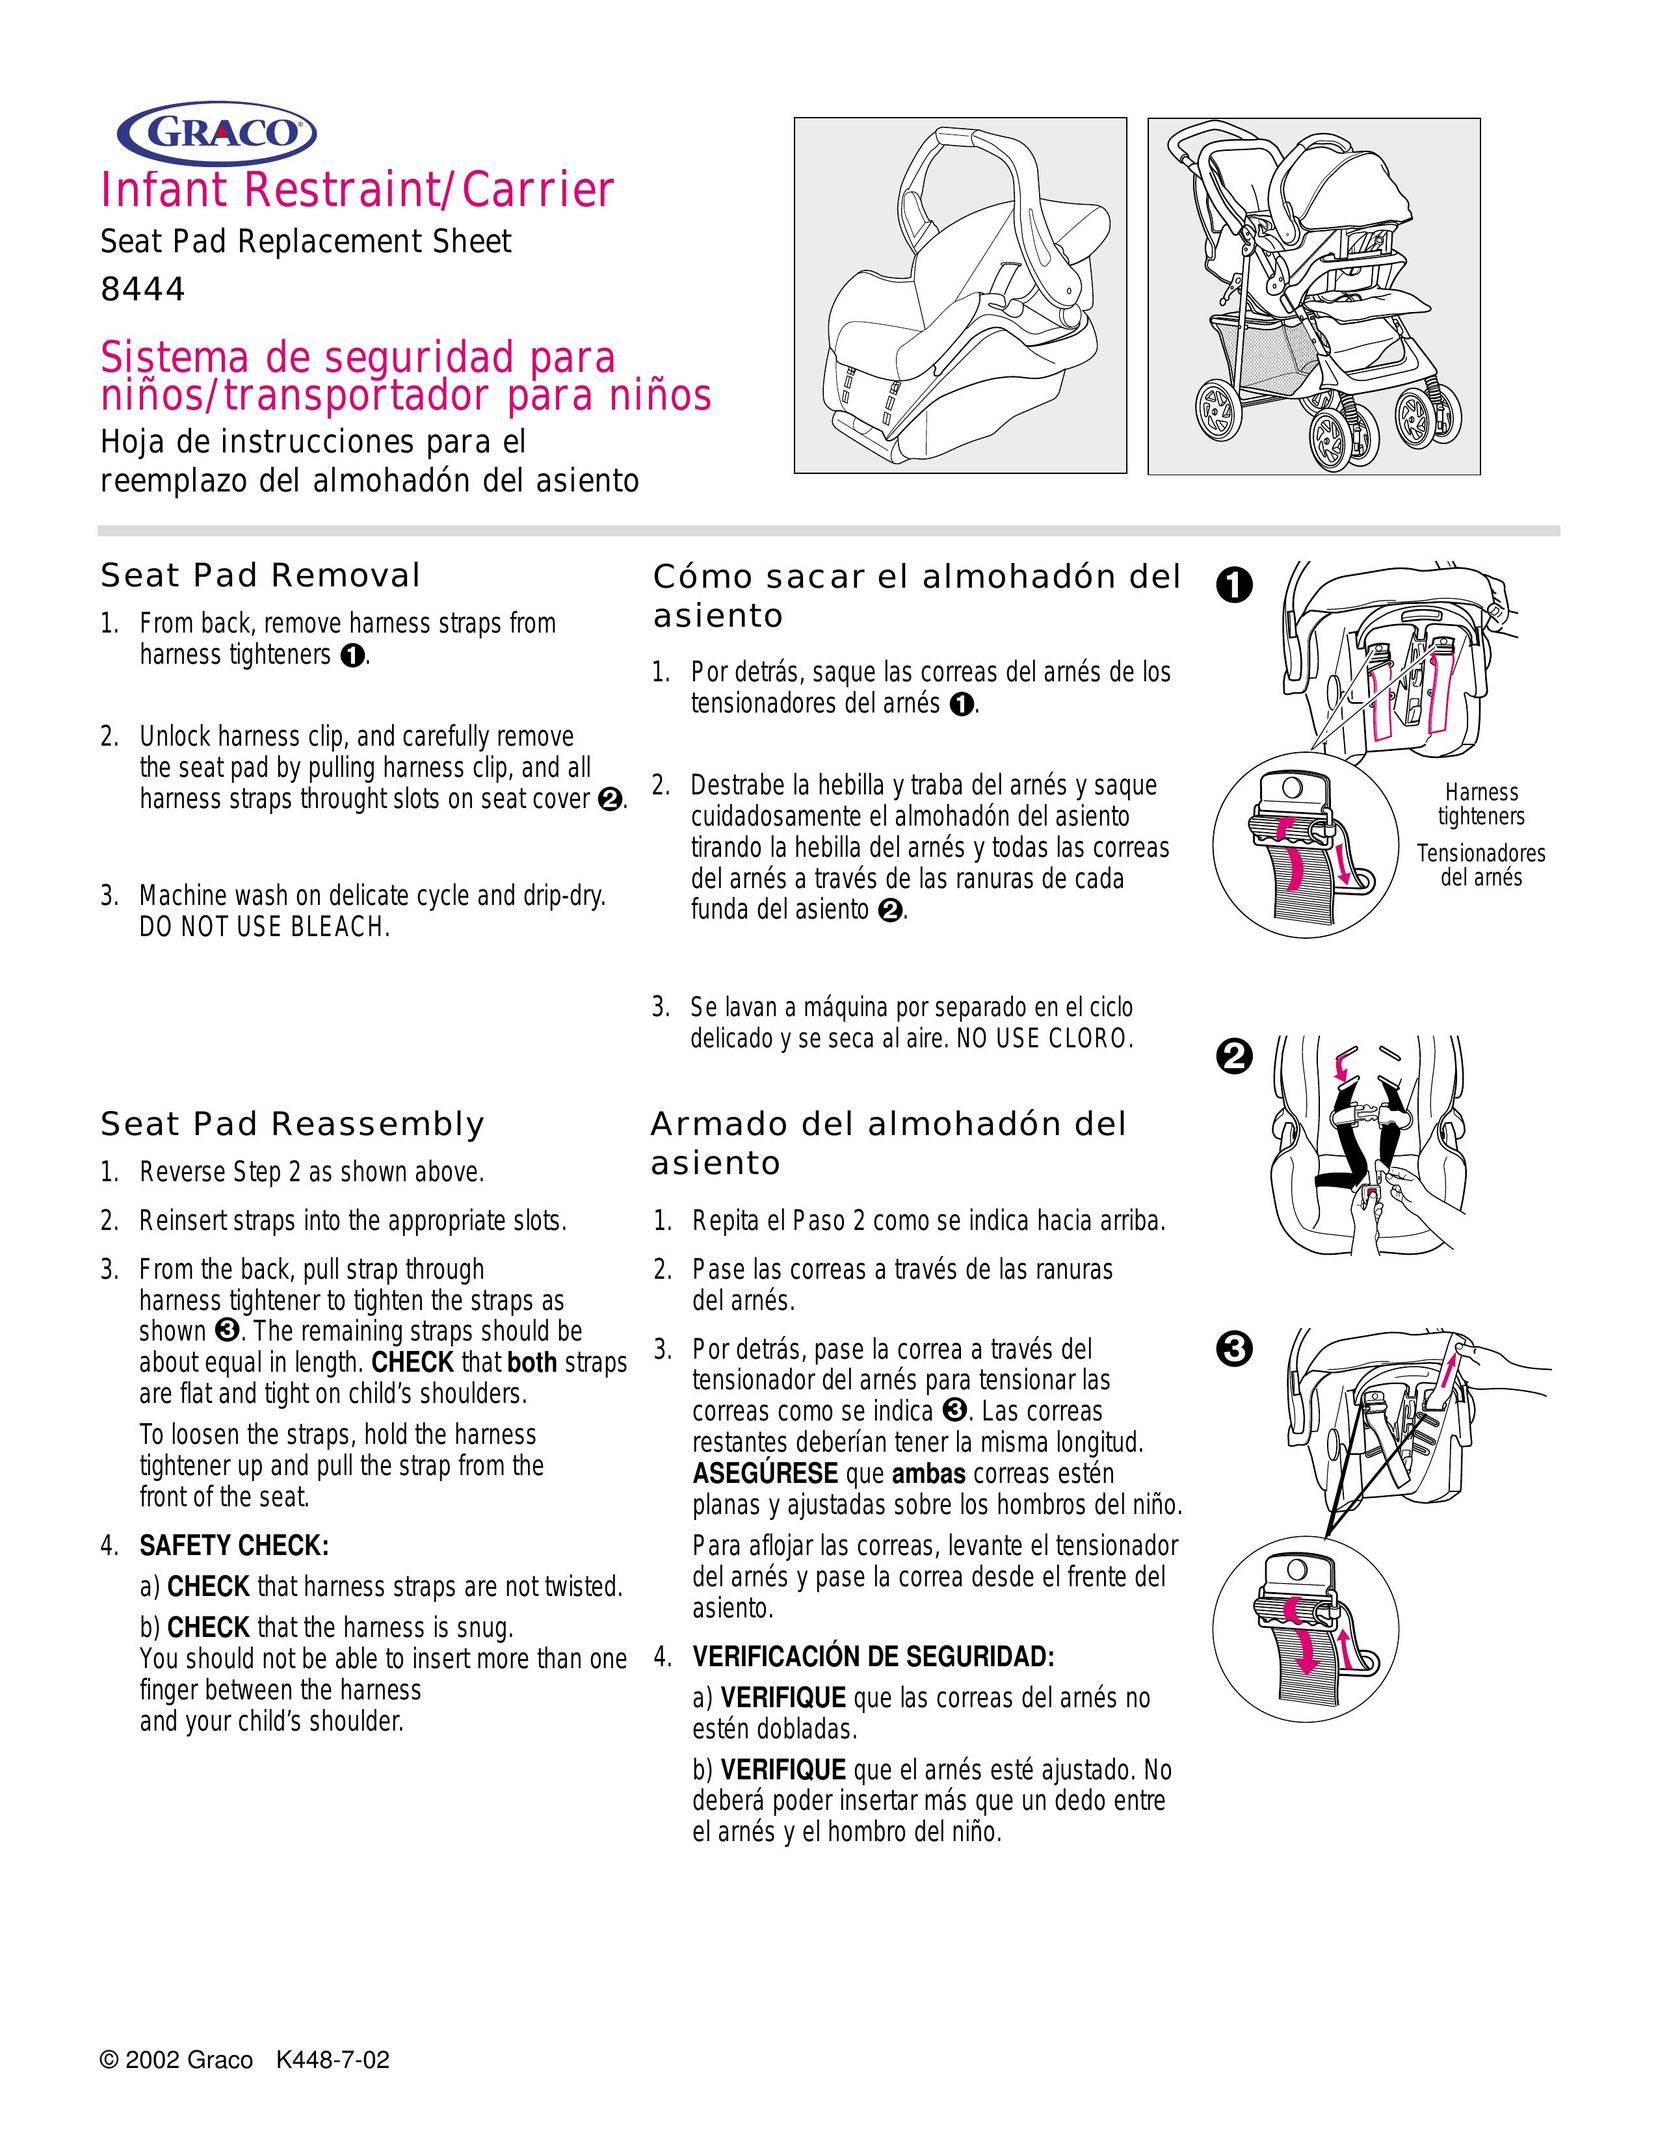 Graco 844 Baby Carrier User Manual (Page 1)